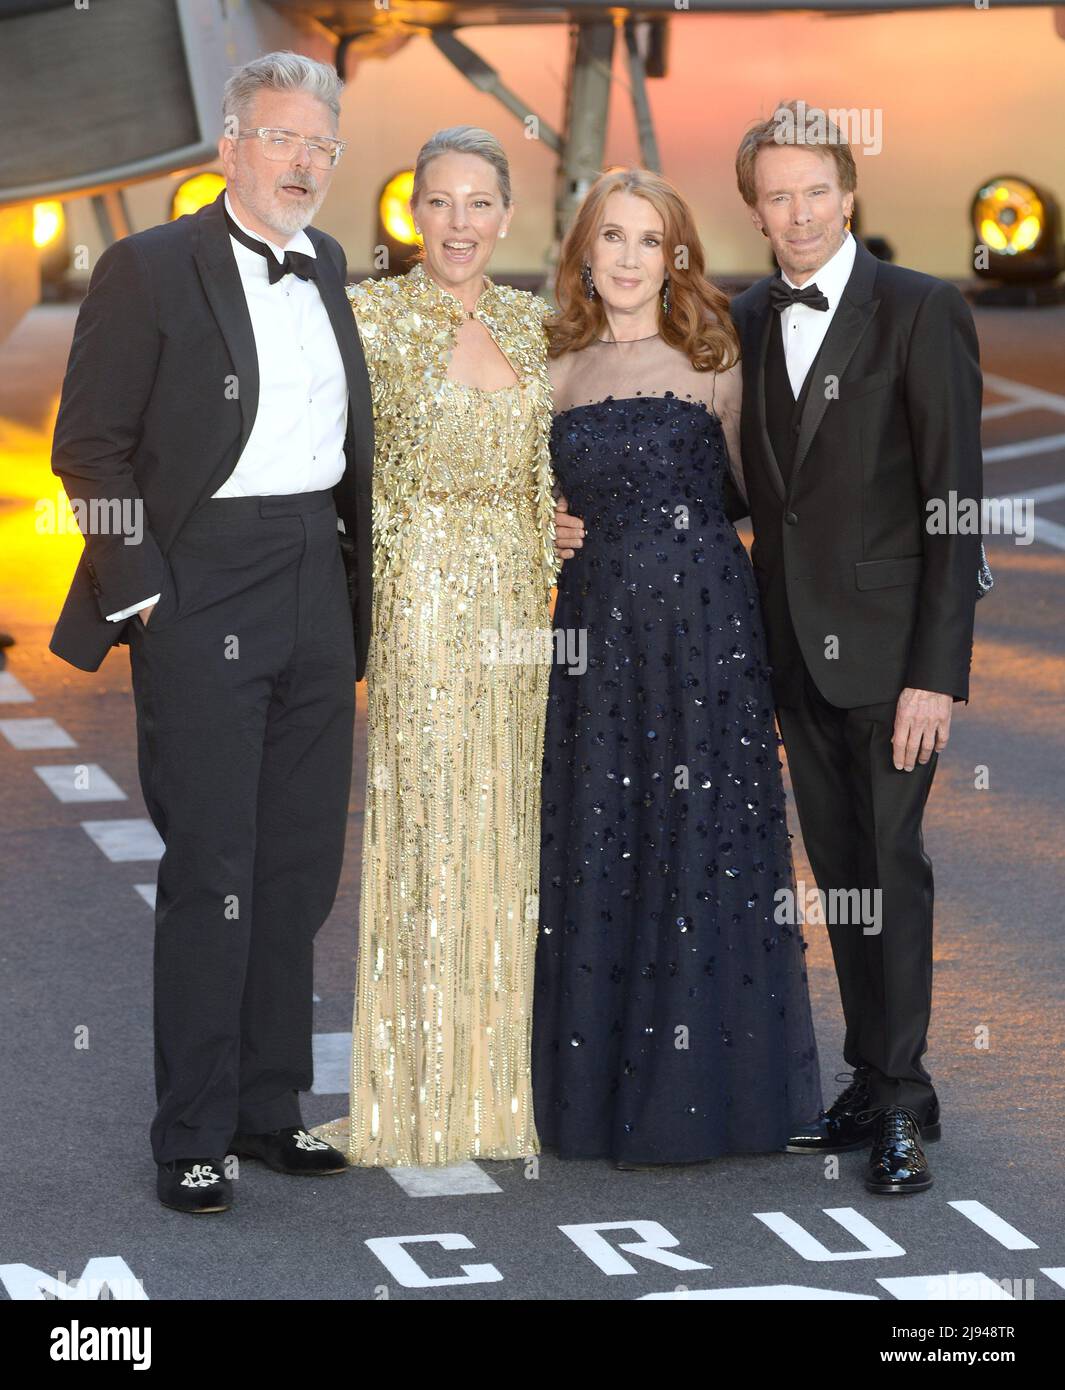 Photo Must Be Credited ©Alpha Press 078237 19/05/2022 Christopher McQuarrie and wife Heather McQuarrie with Jerry Bruckheimer and wife Linda Bruckheimer at the Top Gun Maverick Royal Film Performance held in Leicester Square, London Stock Photo